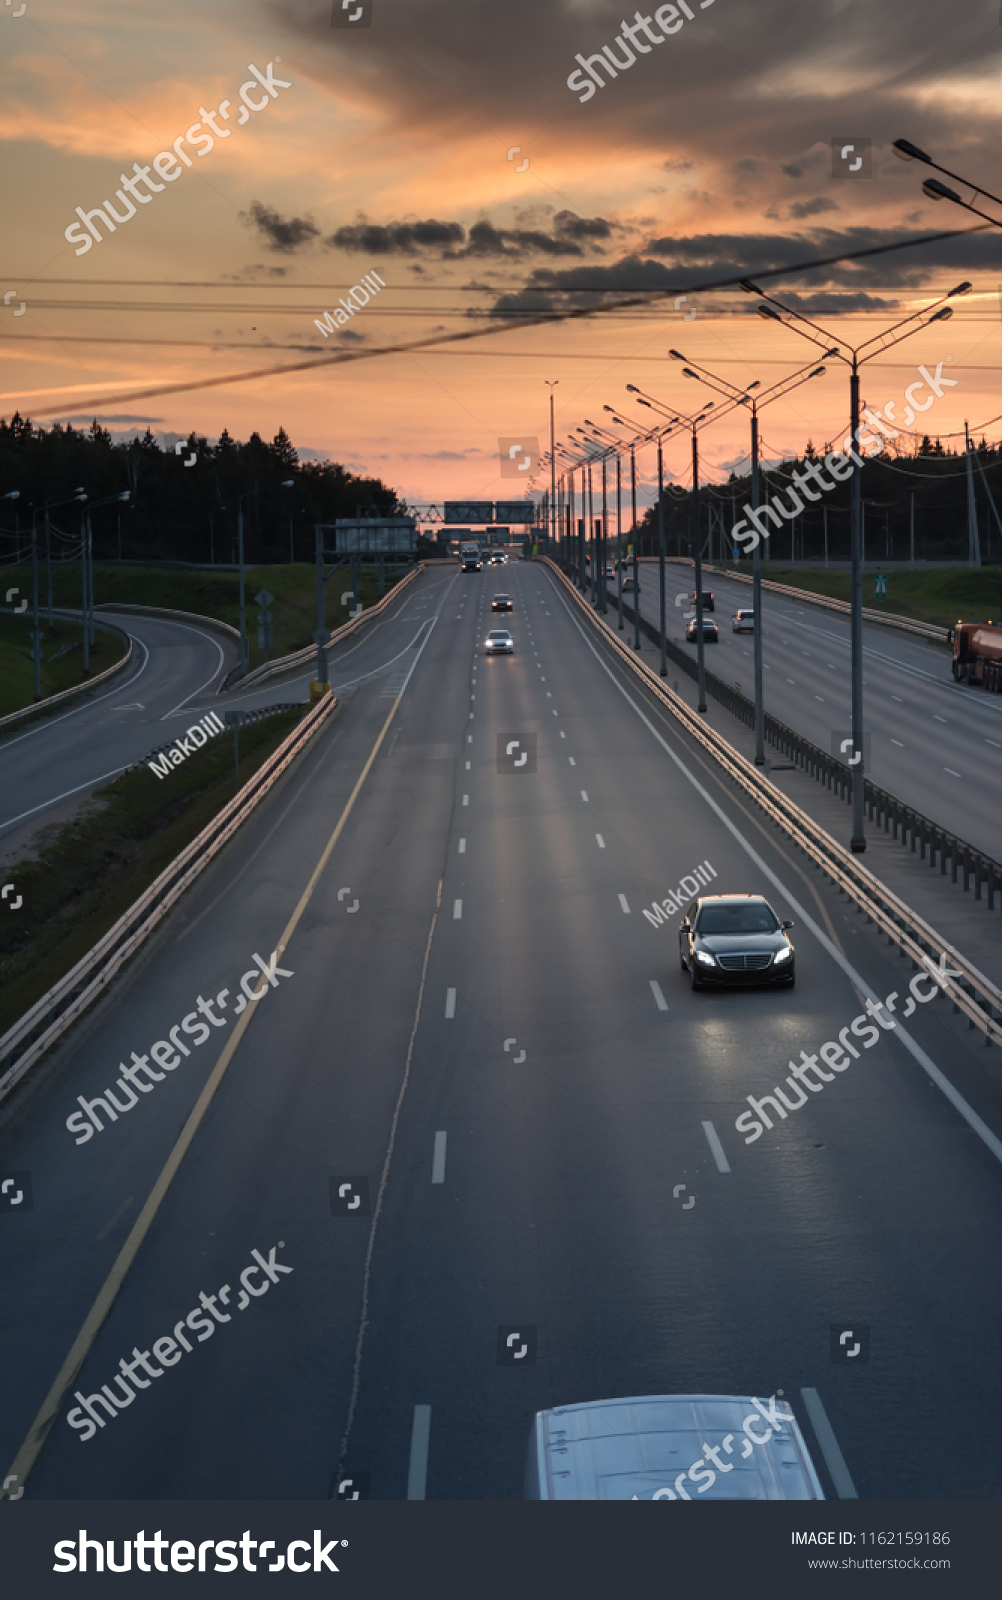 Highway traffic in sunset. minivan on the asphalt road with metal safety barrier or rail. Pine forest on the background #1162159186